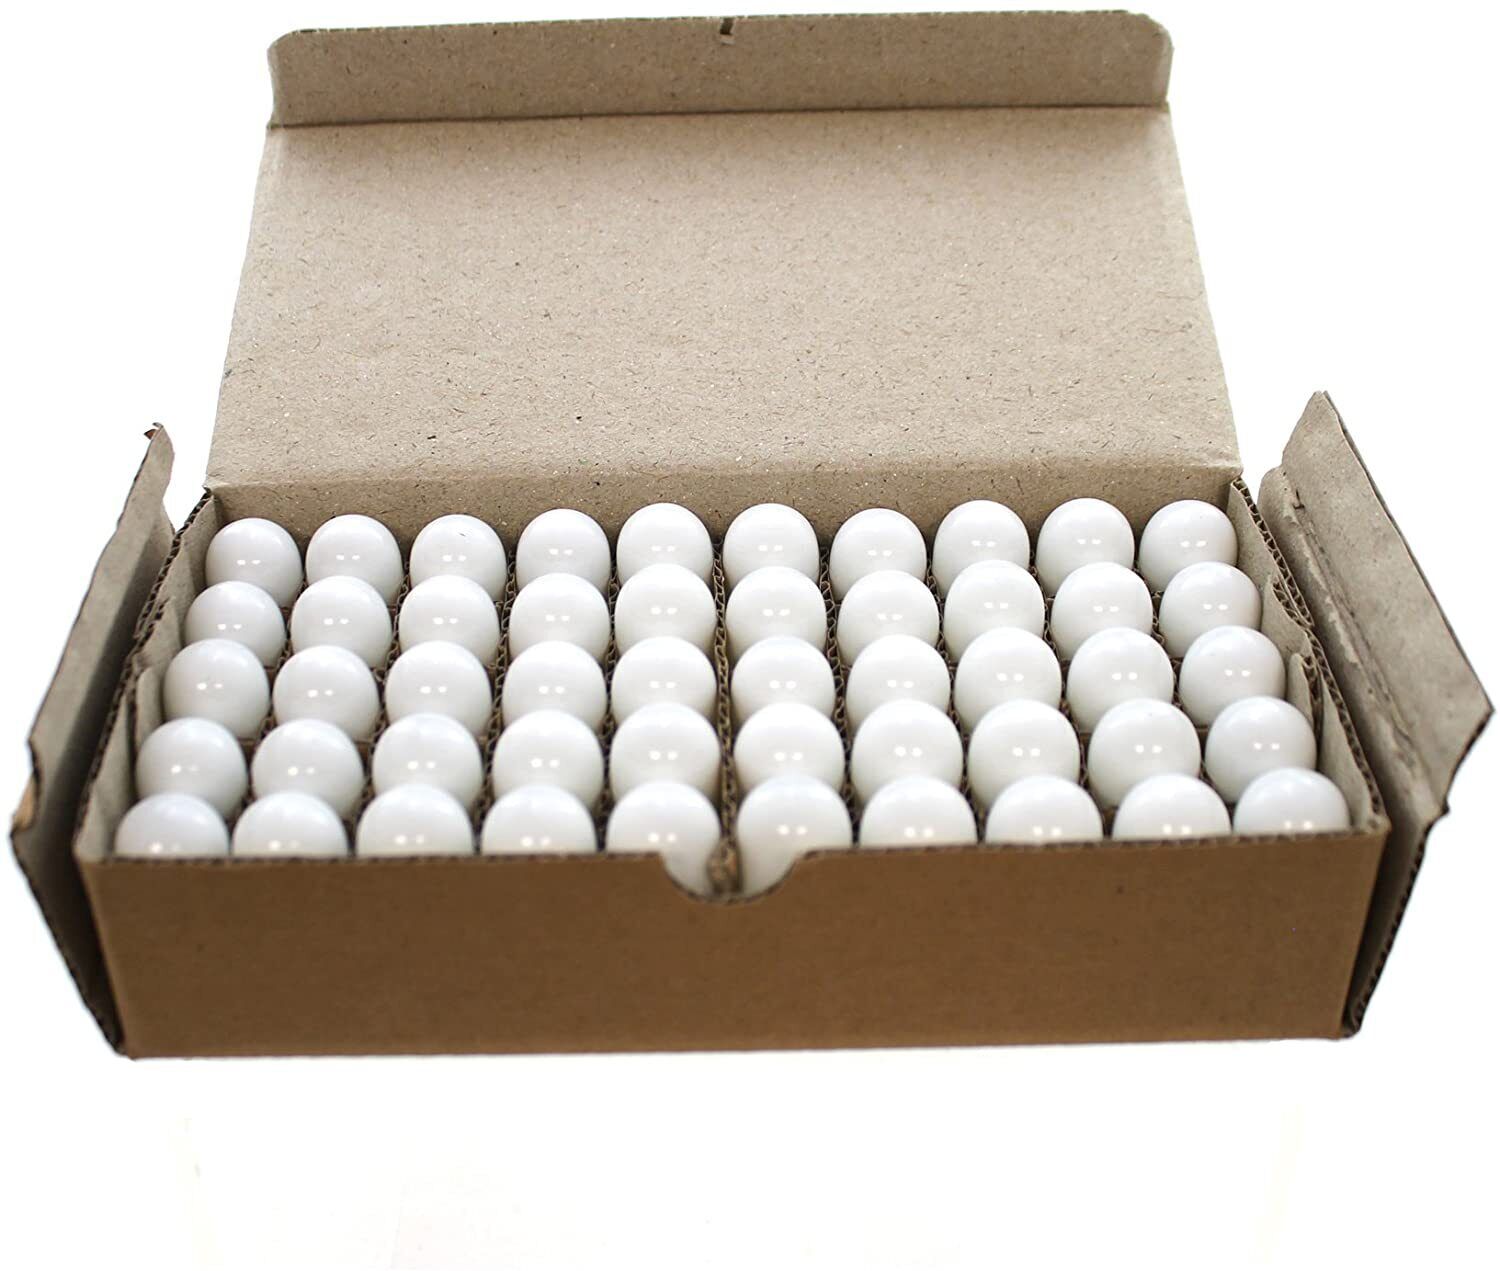 Department 56 Accessories for Villages Replacement Light Bulb (Box of 50)